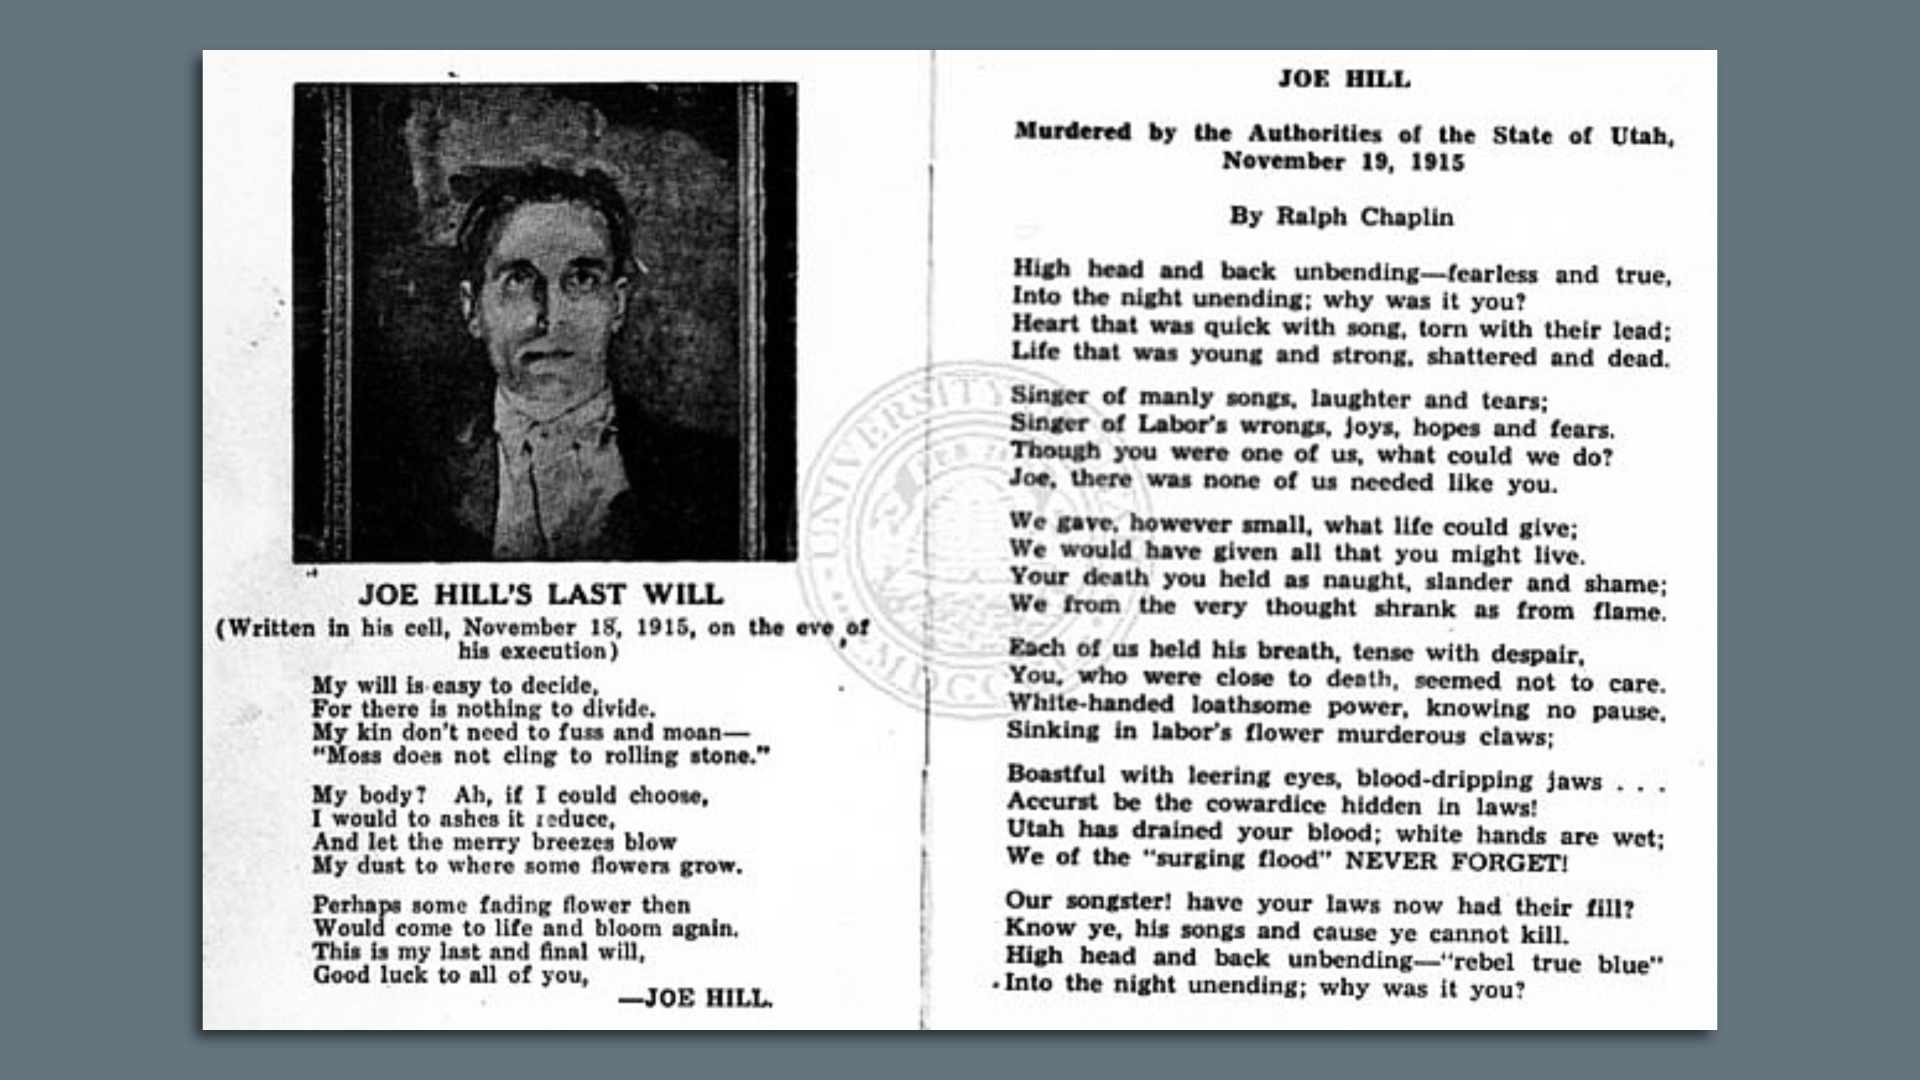 A page from a songbook of lyrics by Joe Hill shows Joe Hill's photo.